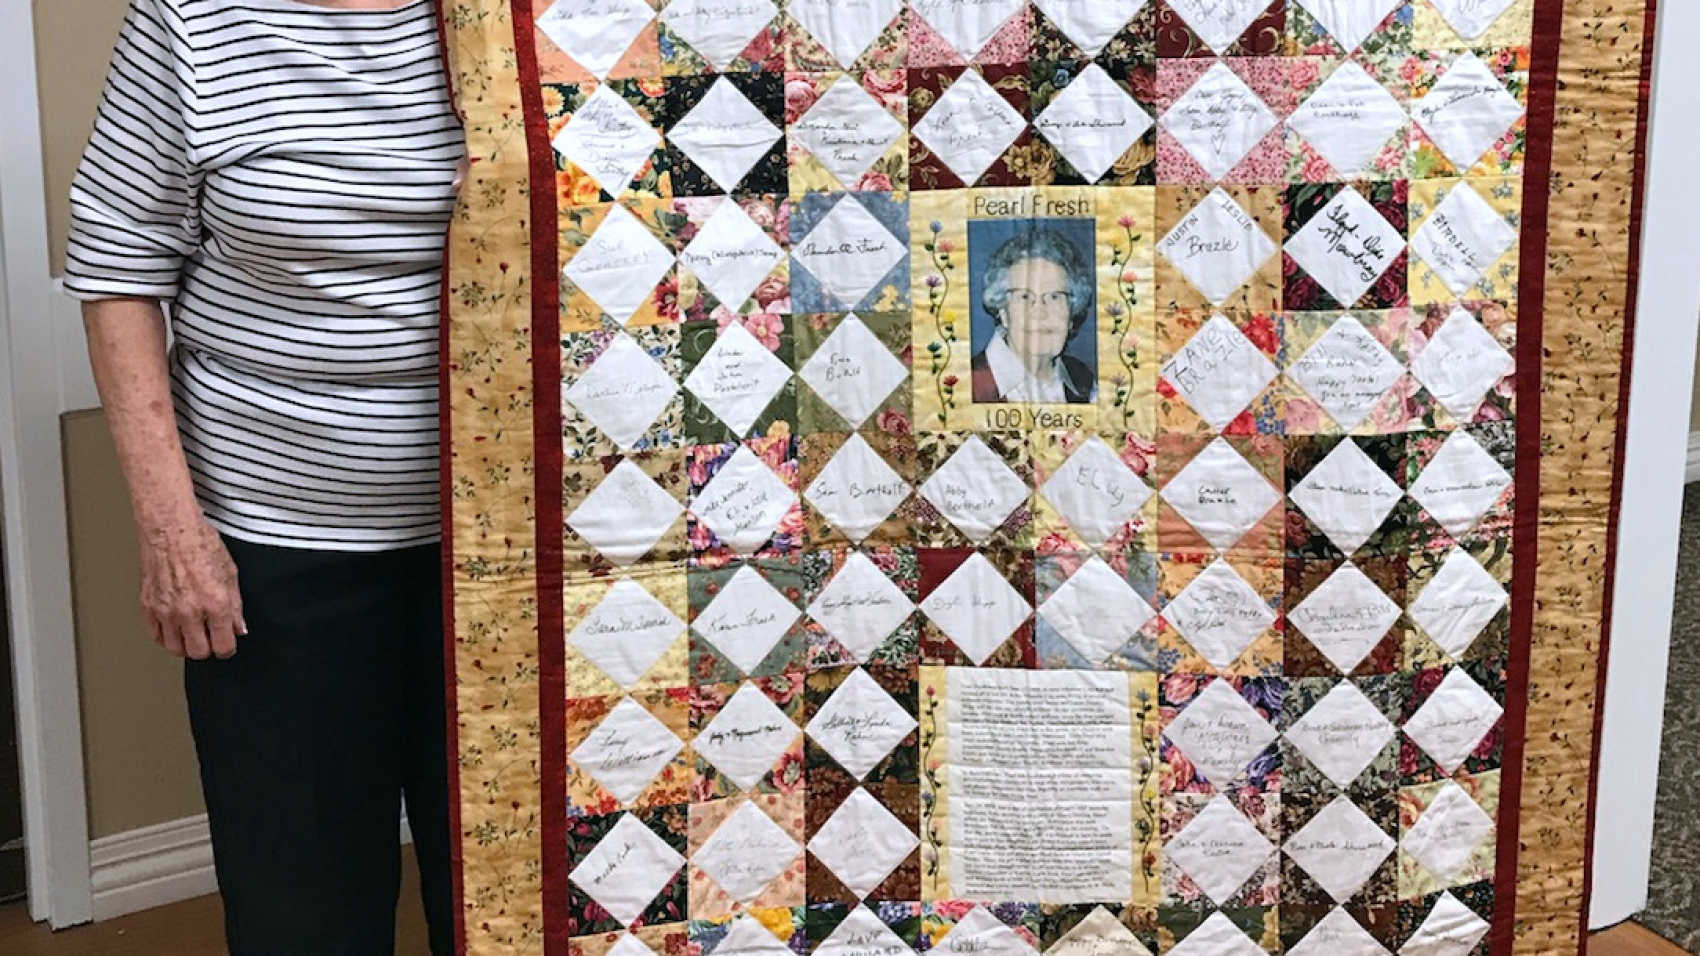 Leta Sherwood poses with the quilt she made to celebrate her mother's 100th birthday. The quilt included blocks of fabric signed by family, friends and even President G.W. Bush.